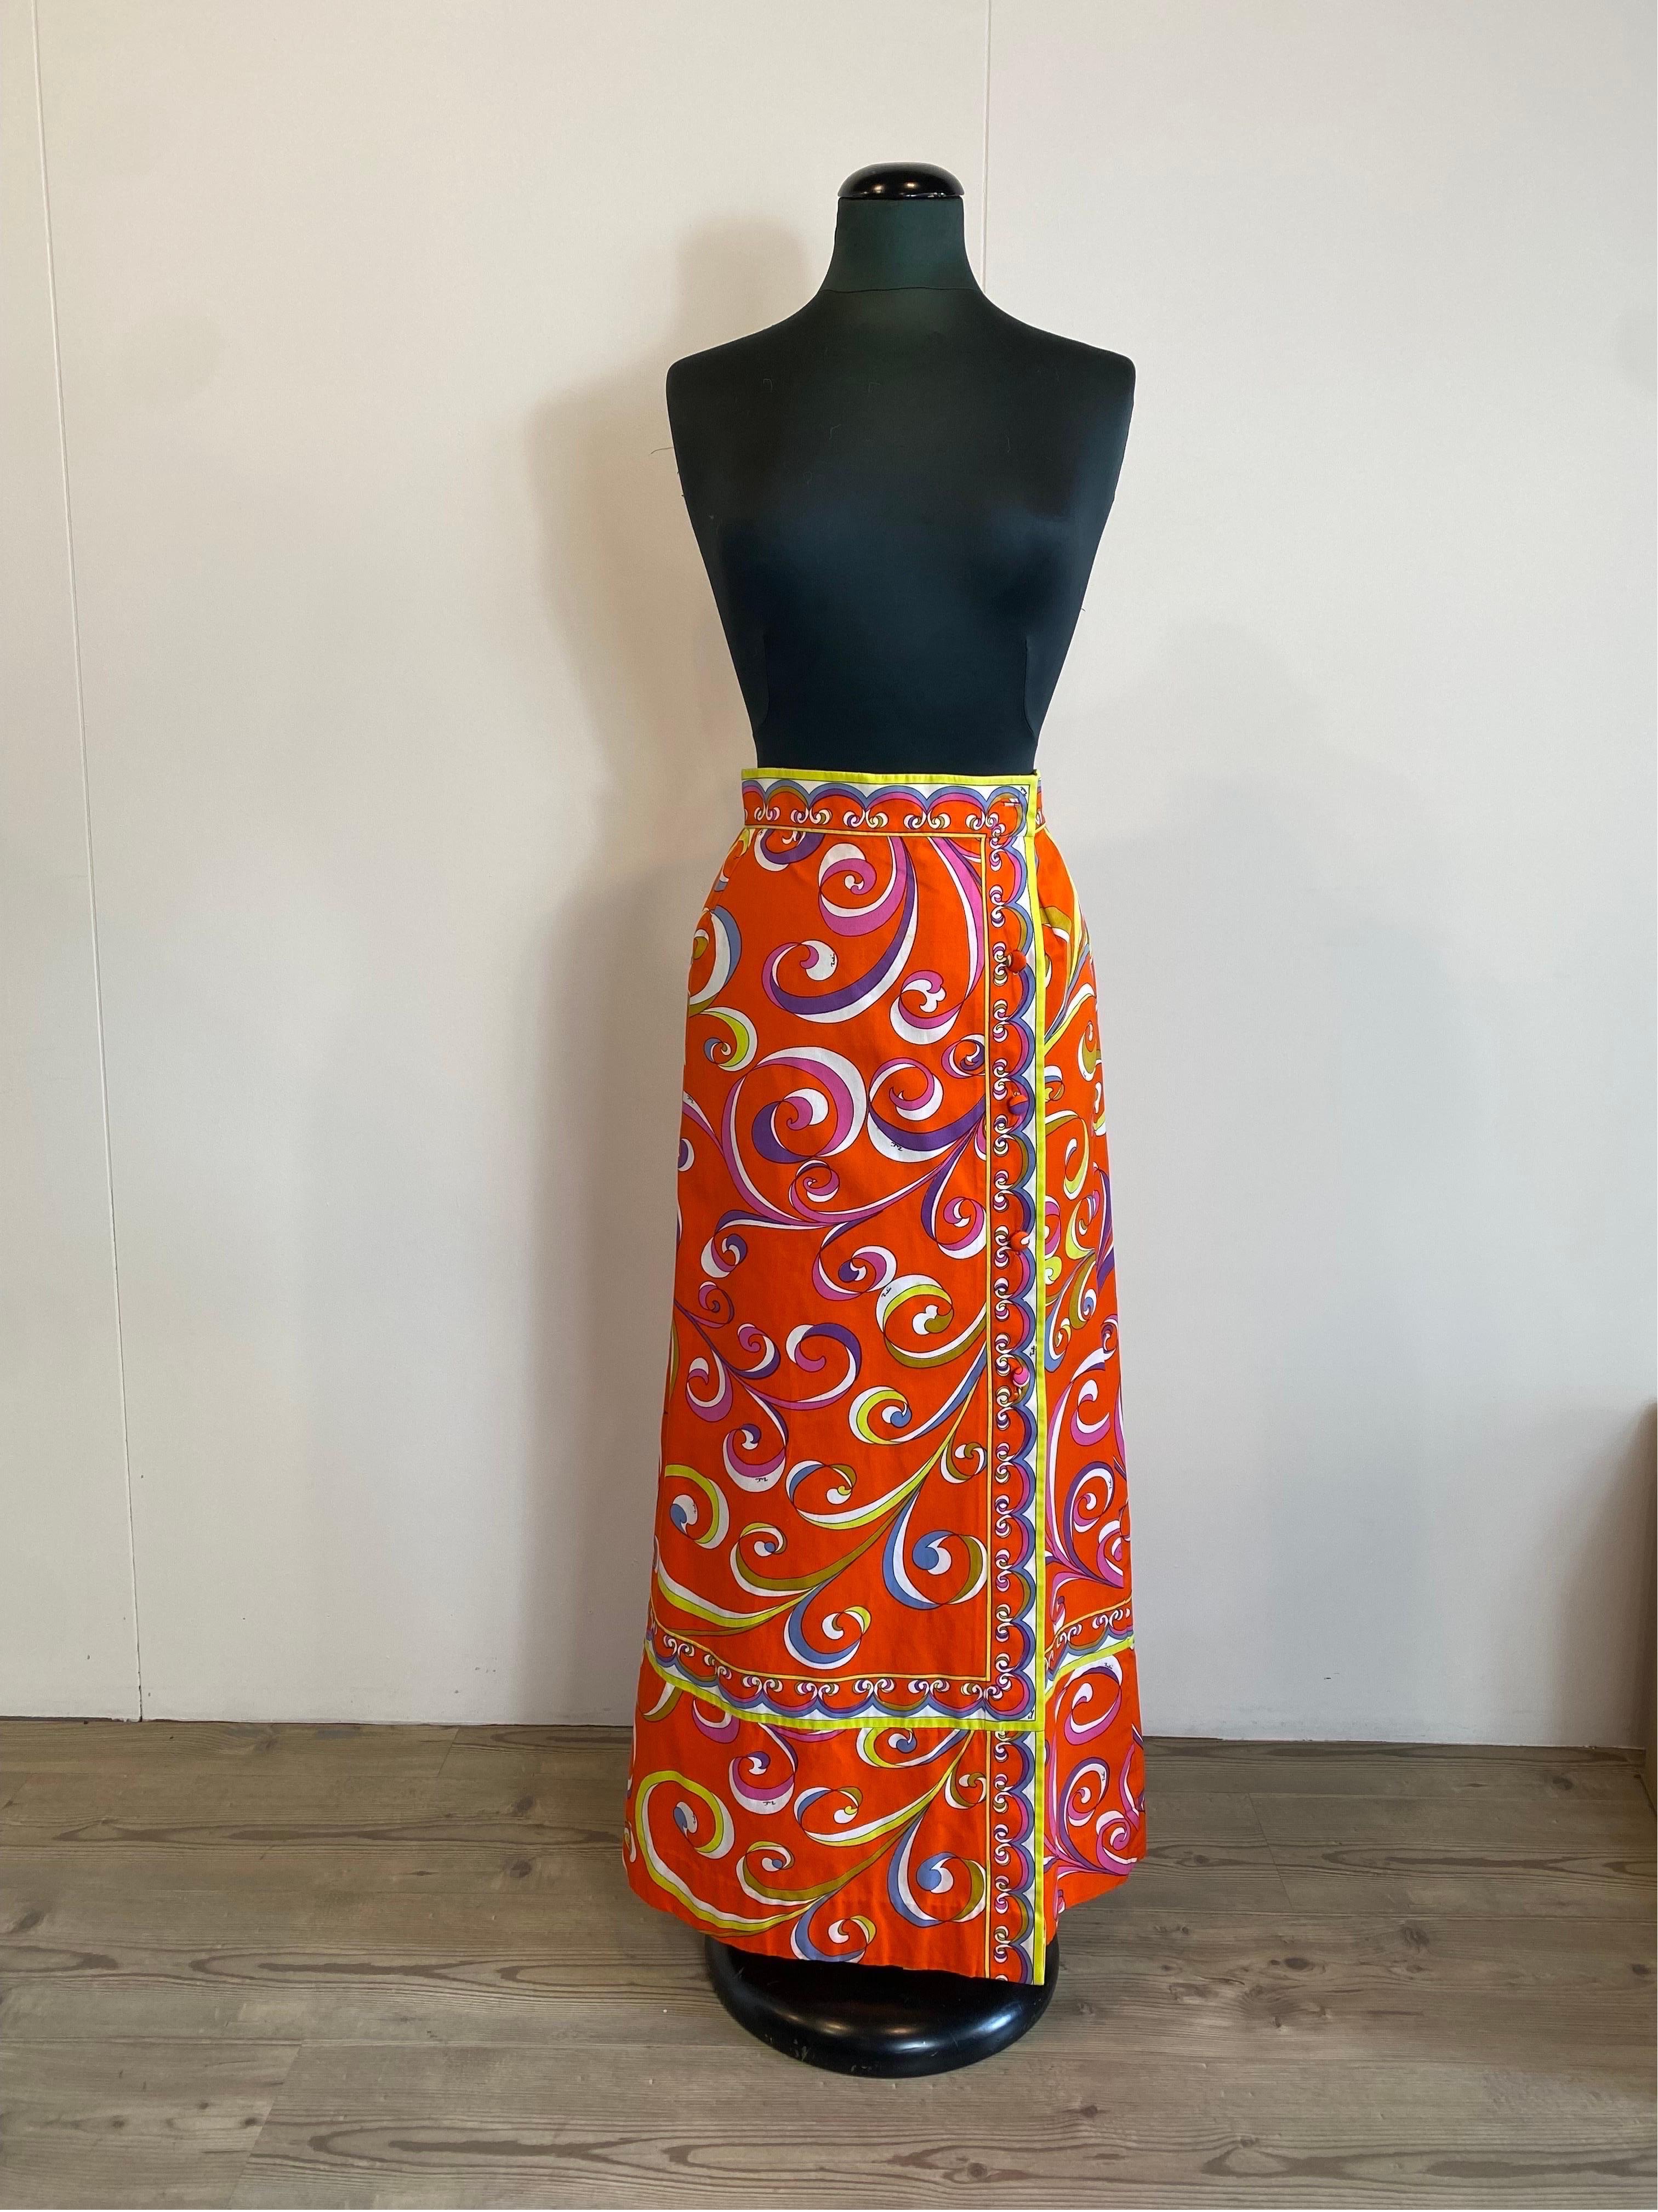 Emilio Pucci long Skirt. 
70s vintage piece.
Composition label missing but we think it is cotton.
Iconic Pucci pattern in shades of orange.
The first button is missing but the skirt closes anyway thanks to the internal hooks.
Size 10 which